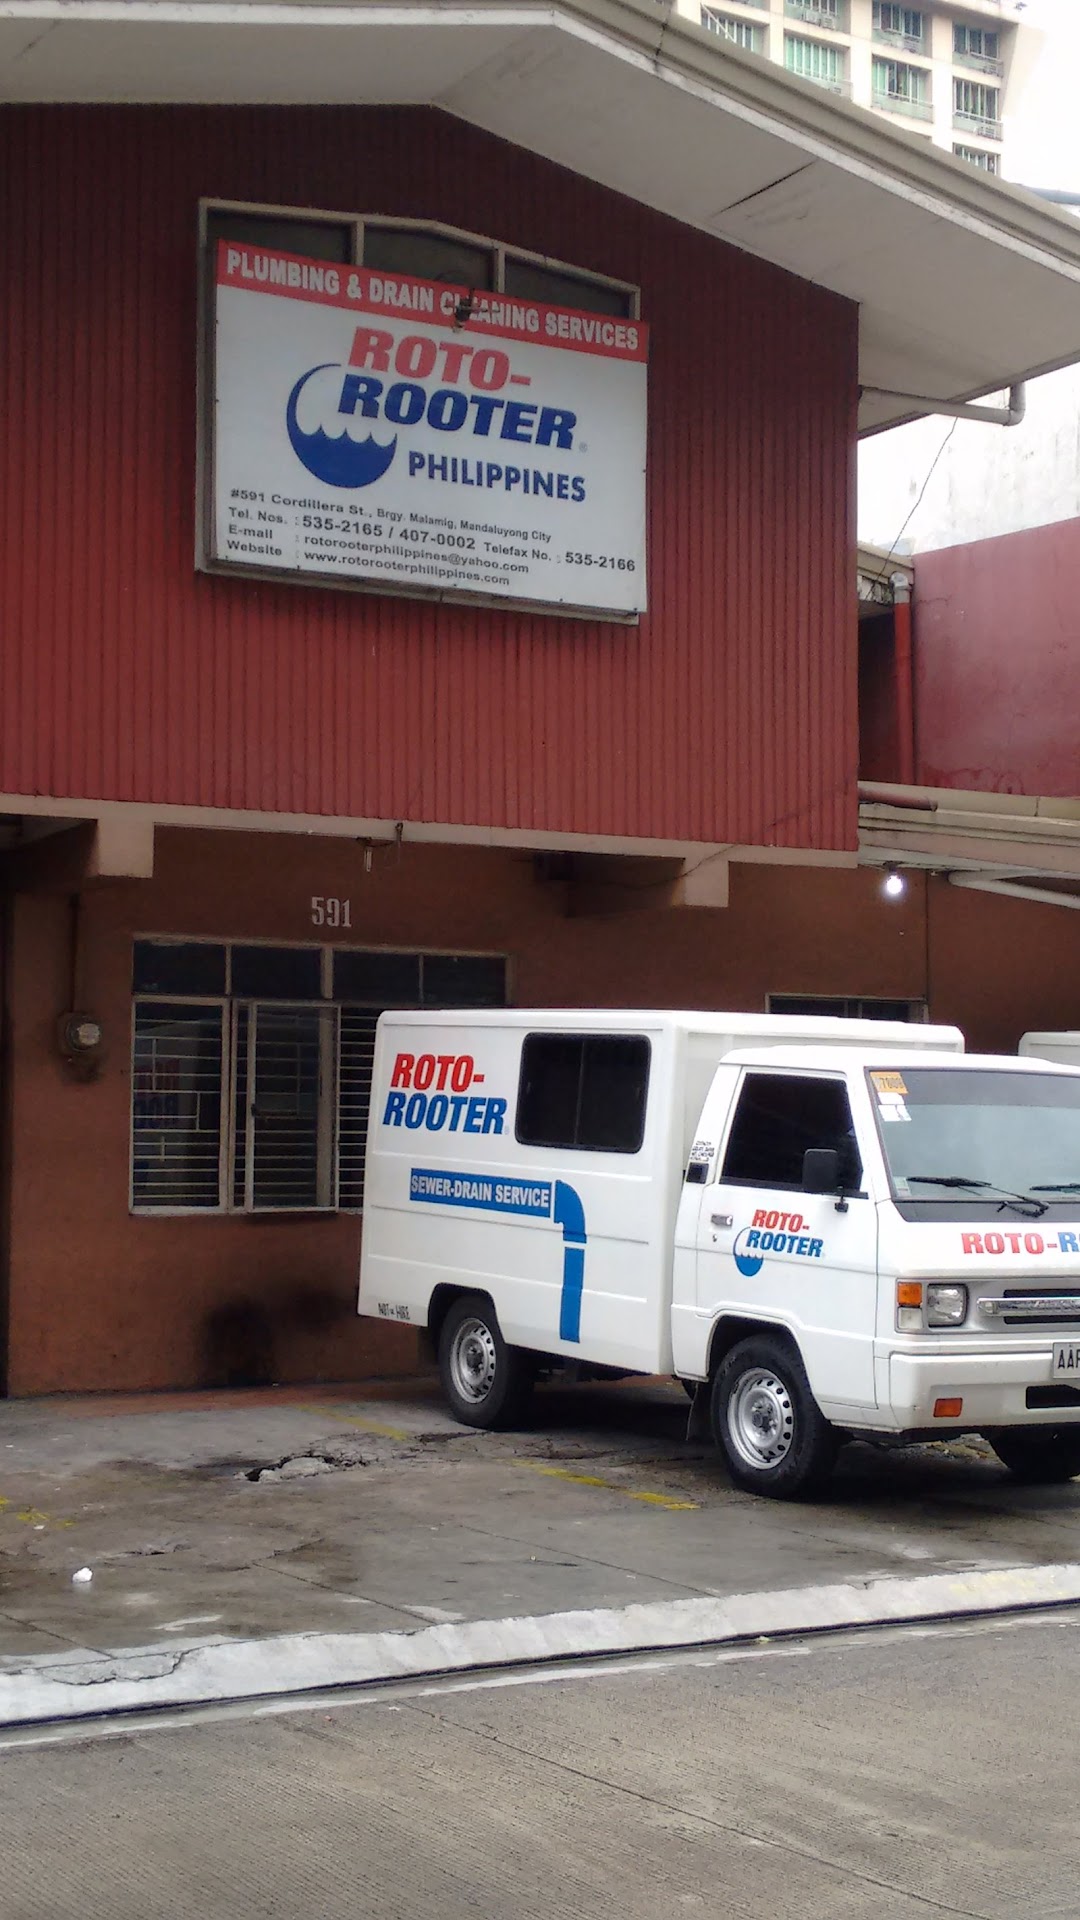 Roto-Rooter Philippines